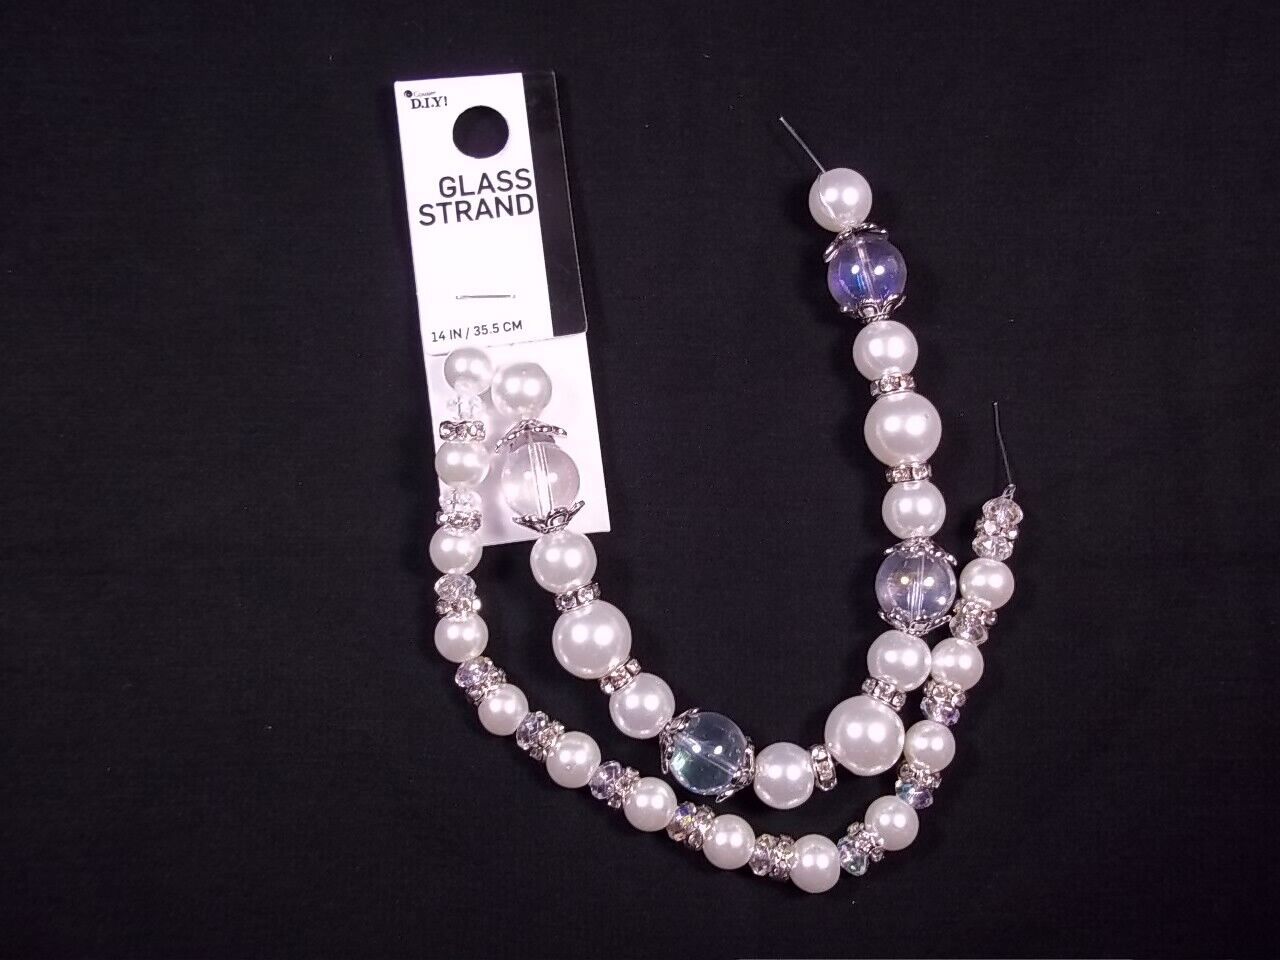 Cousin DIY 14" glass beads strand Faux Pearl & clear silvertone fillers NEW - $9.95